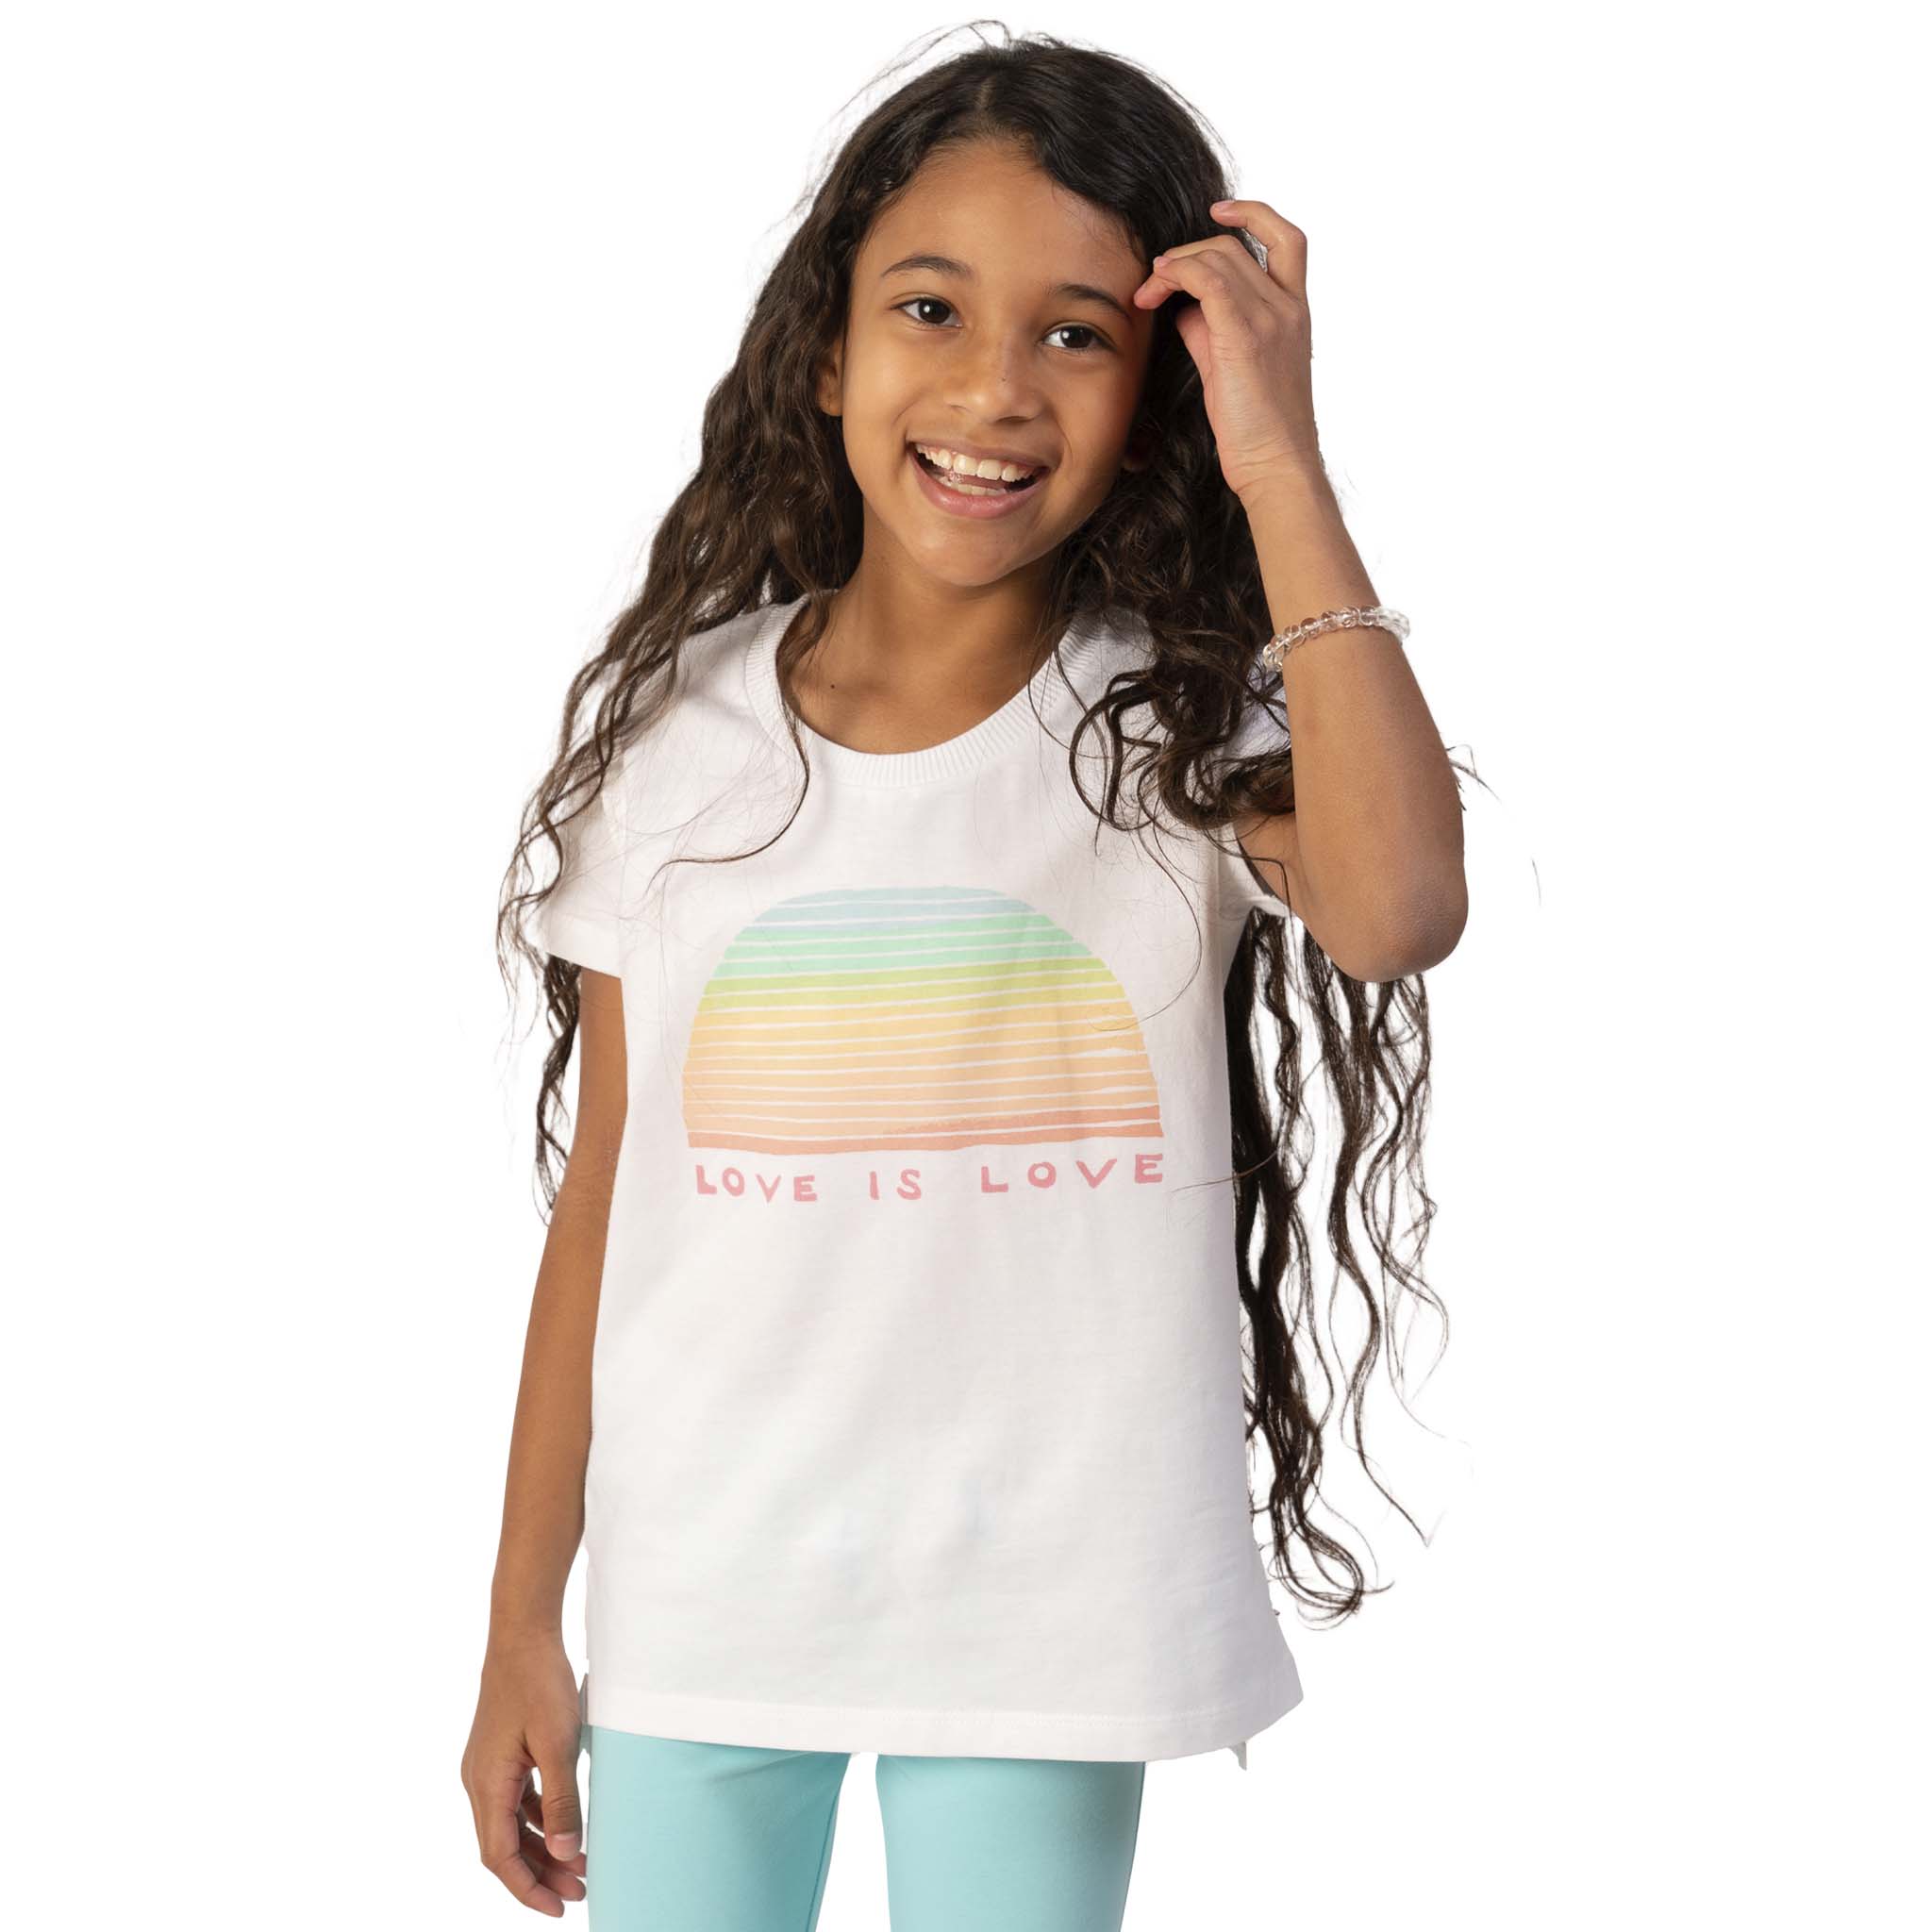 Girl shirts in various colors - scoop neck tees for stylish and comfortable outfits